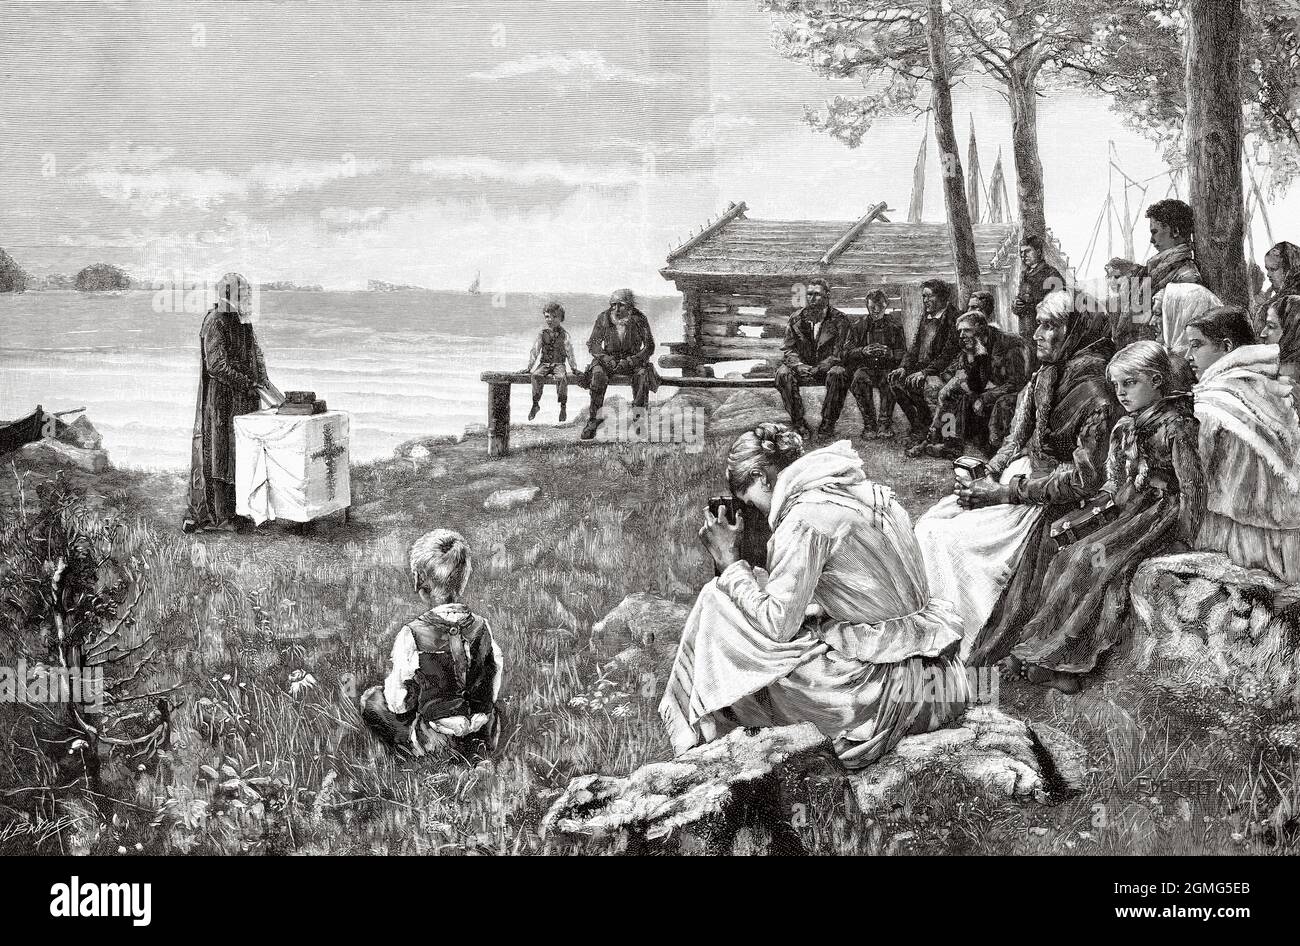 Religious ceremony, Mass, Sea, painting by Albert Gustaf Aristides Edelfelt (1854-1905) was a Finnish painter noted for his naturalistic style and Realist approach to art. Old 19th century engraved illustration from La Ilustración Artística 1882 Stock Photo